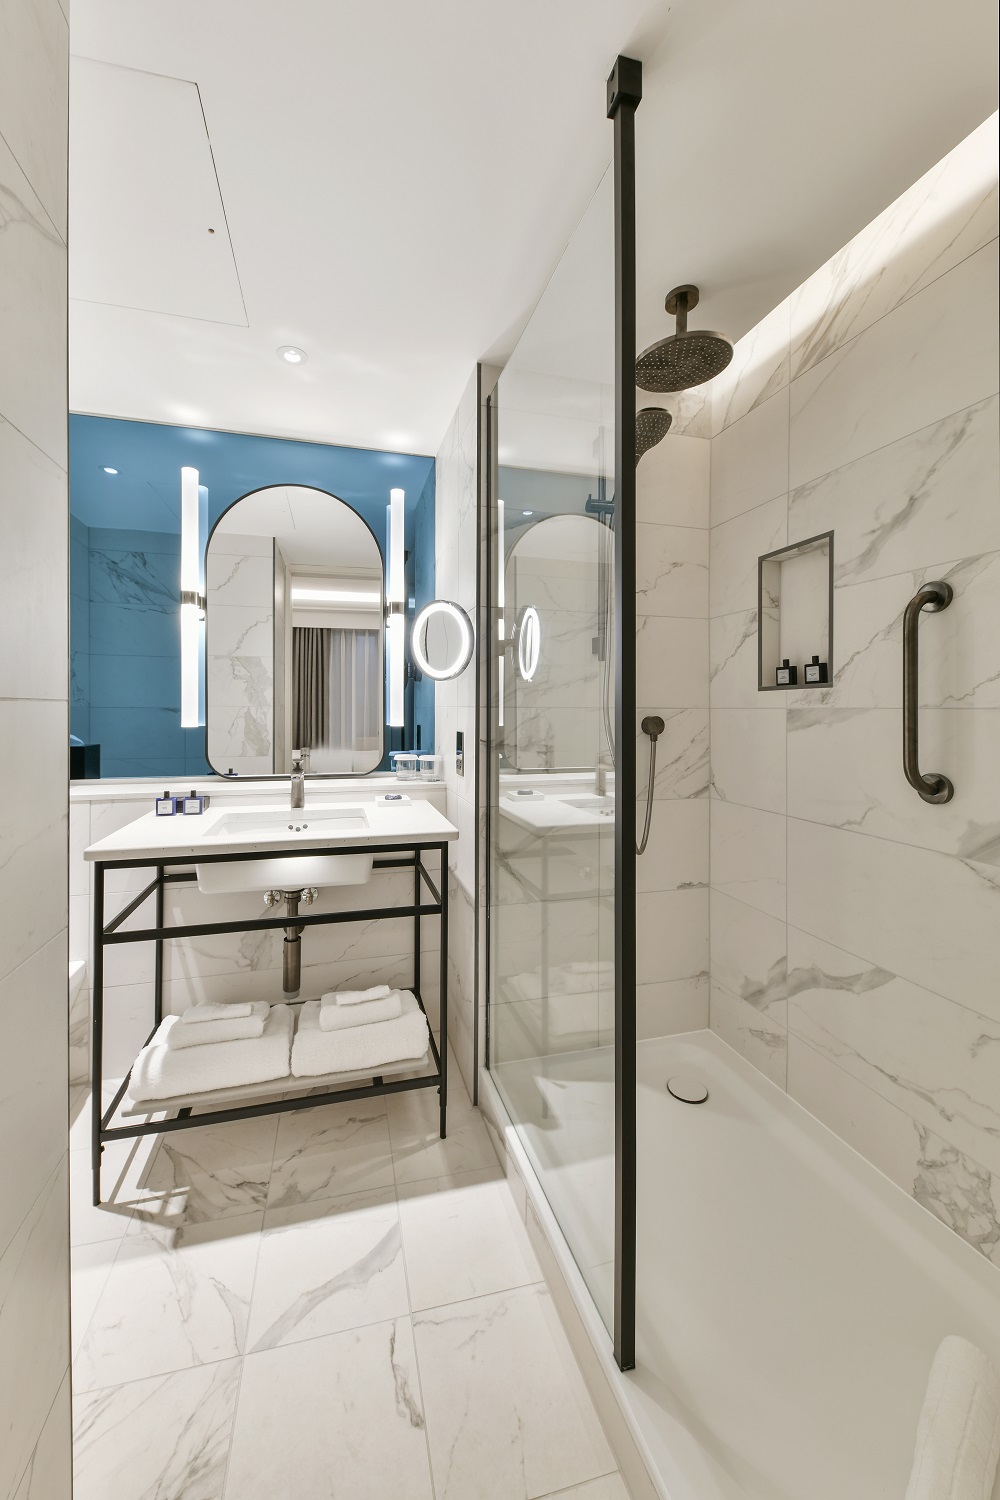 contemporary bathroom in blue and white